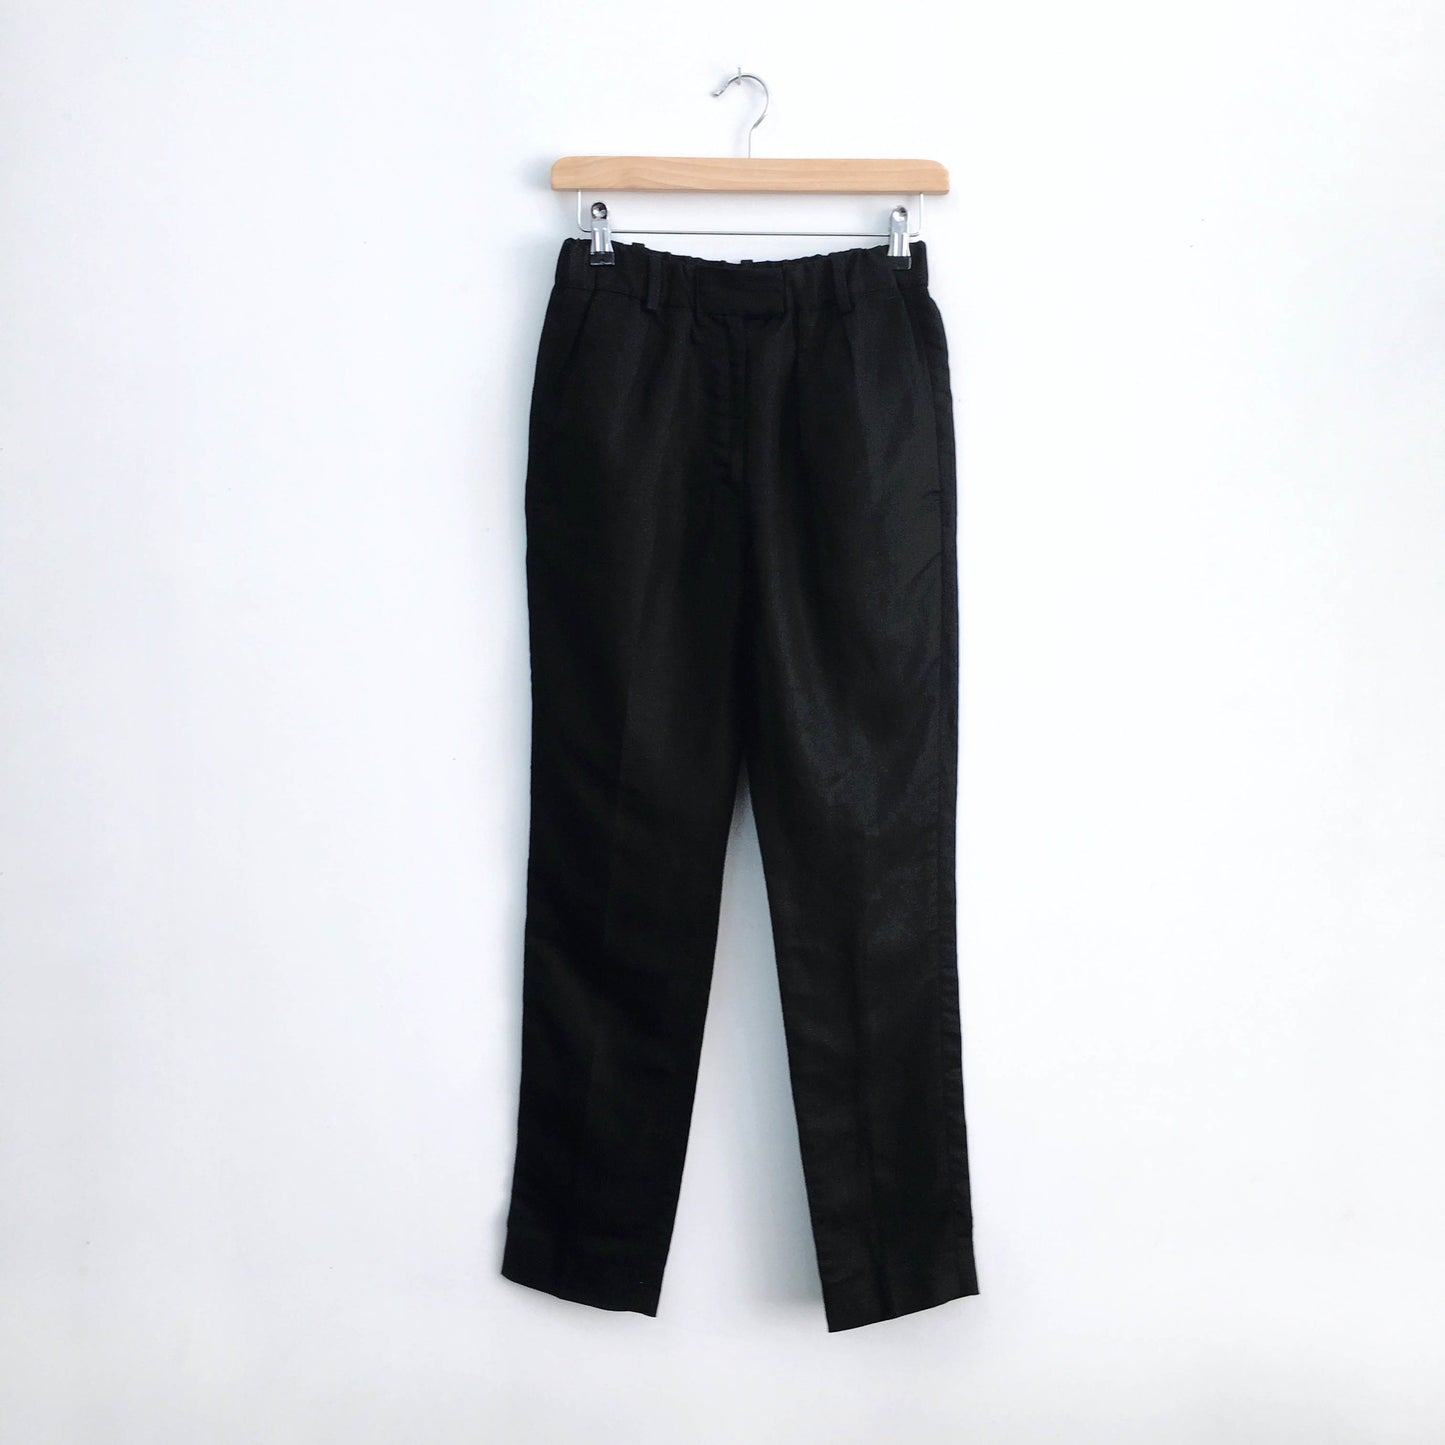 Isabel Marant high rise linen Trousers - size 0